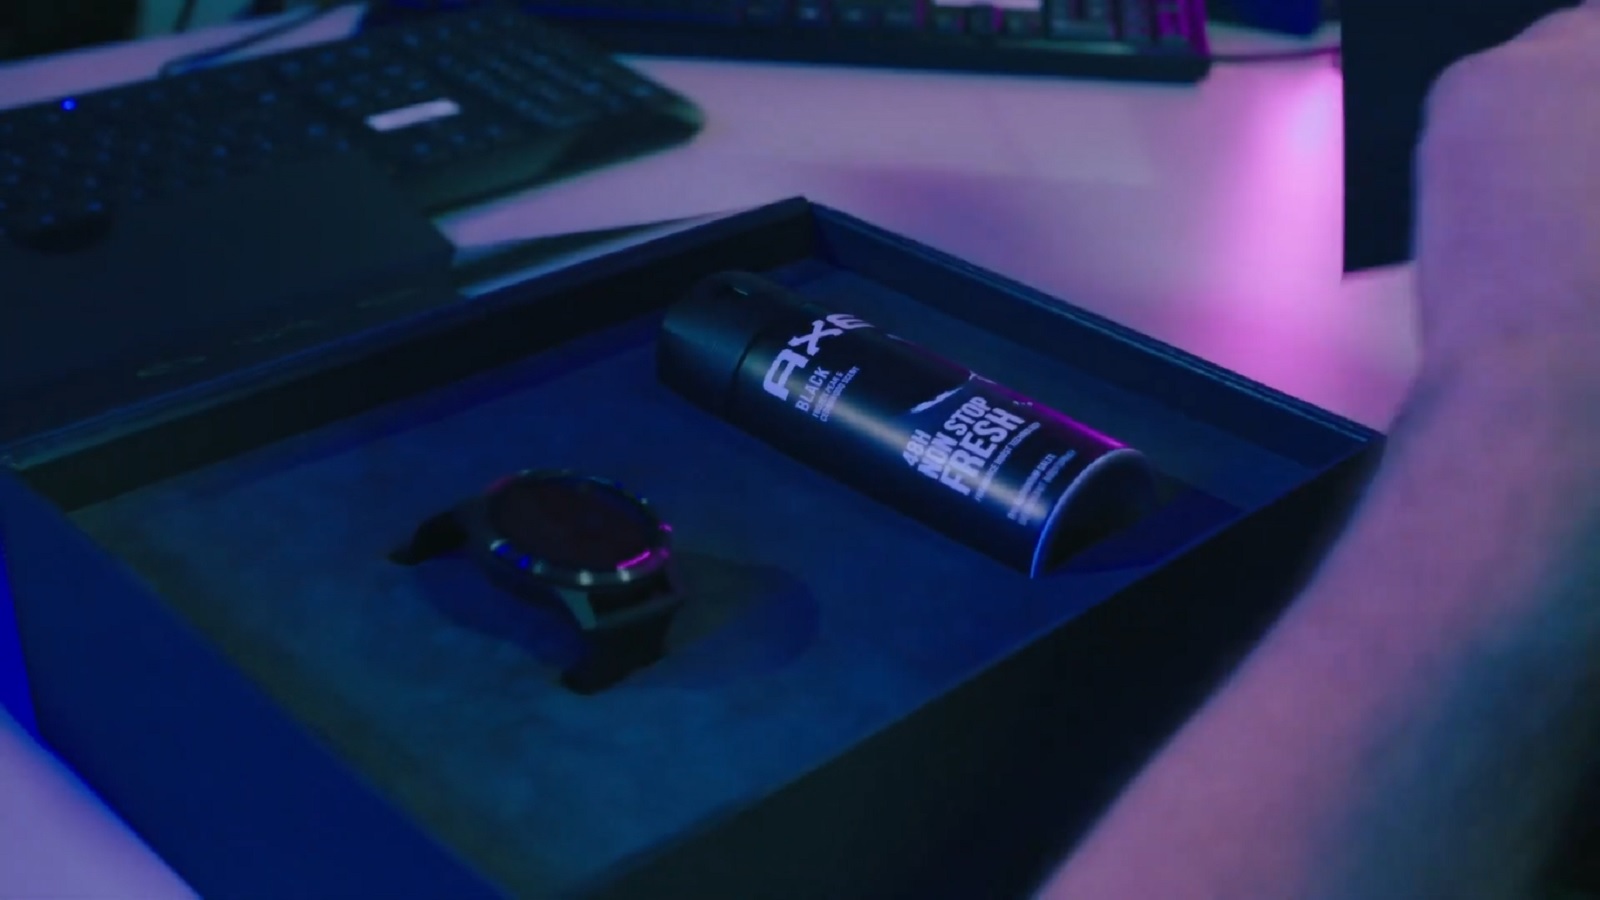 Does Lynx Body Spray Help Gamers Perform Better?